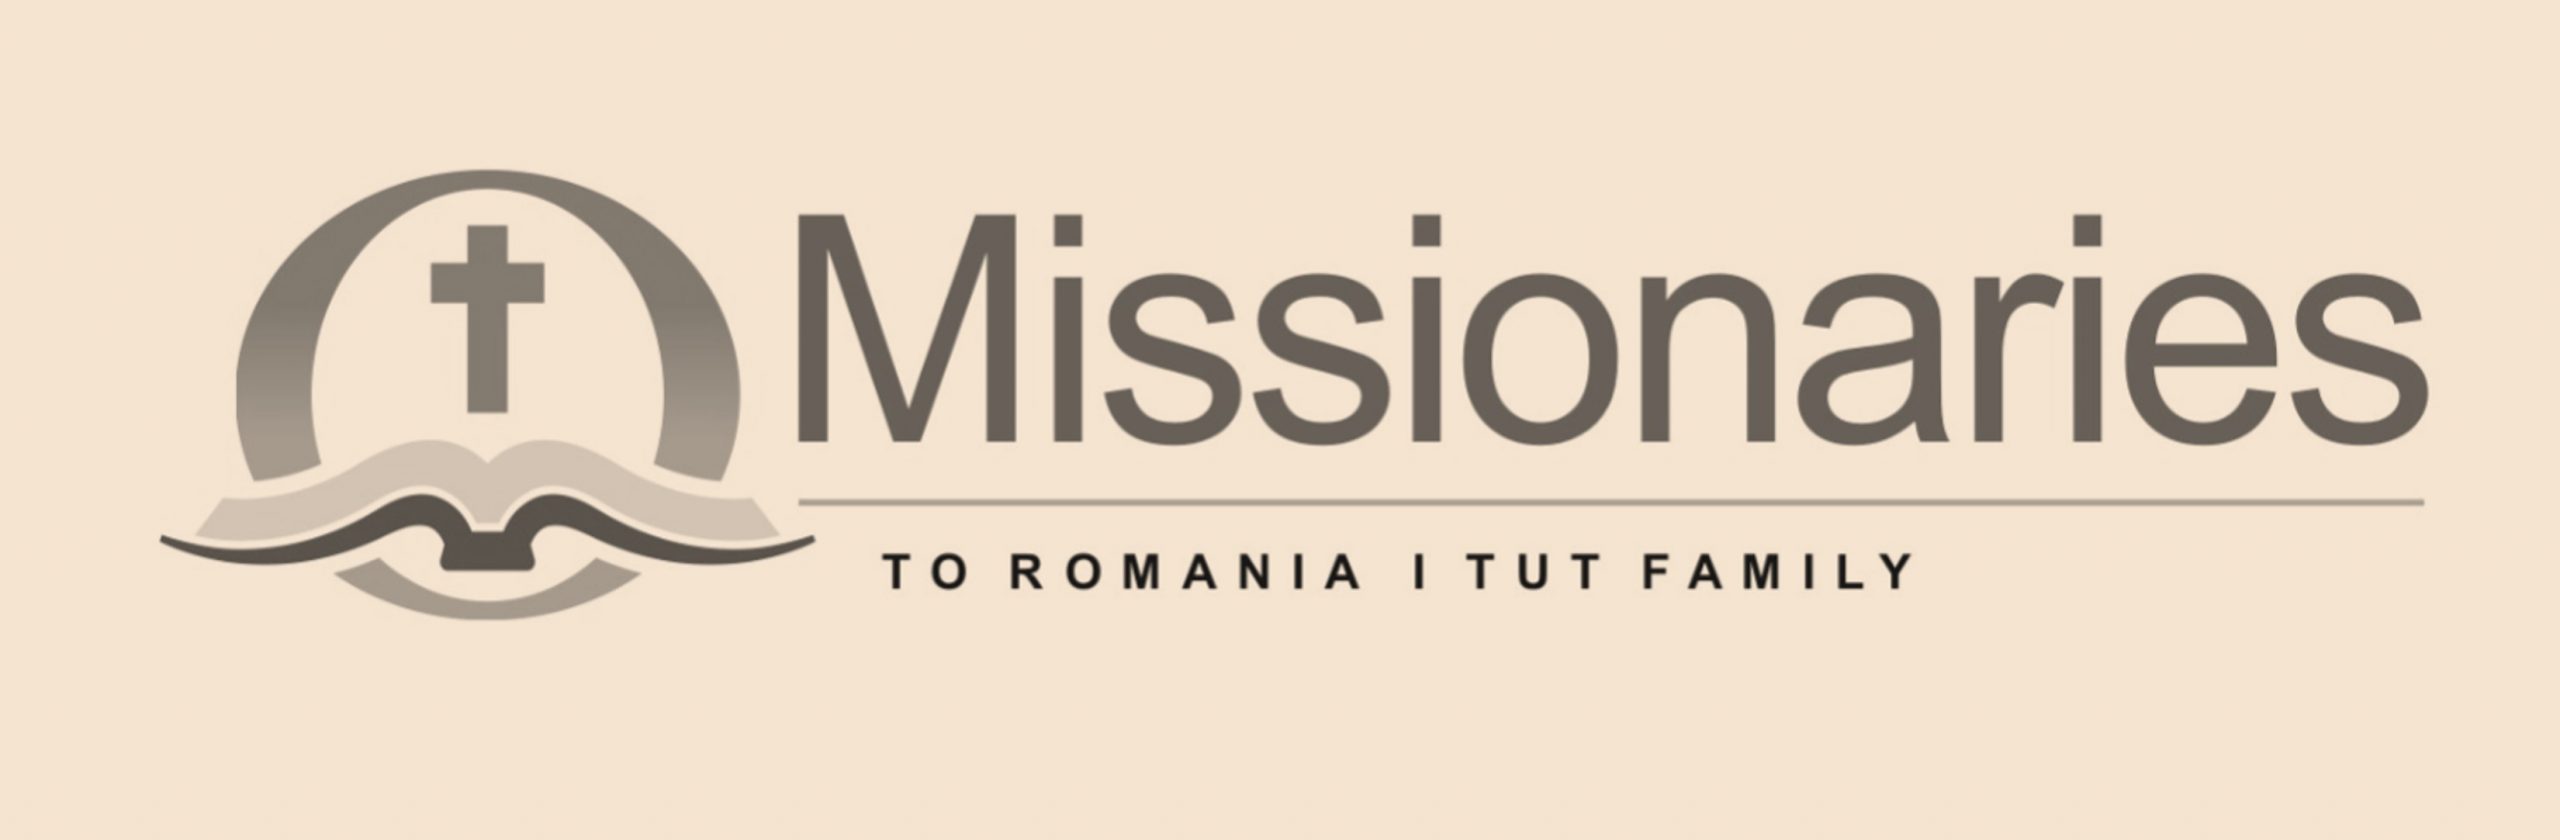 tutmissions6